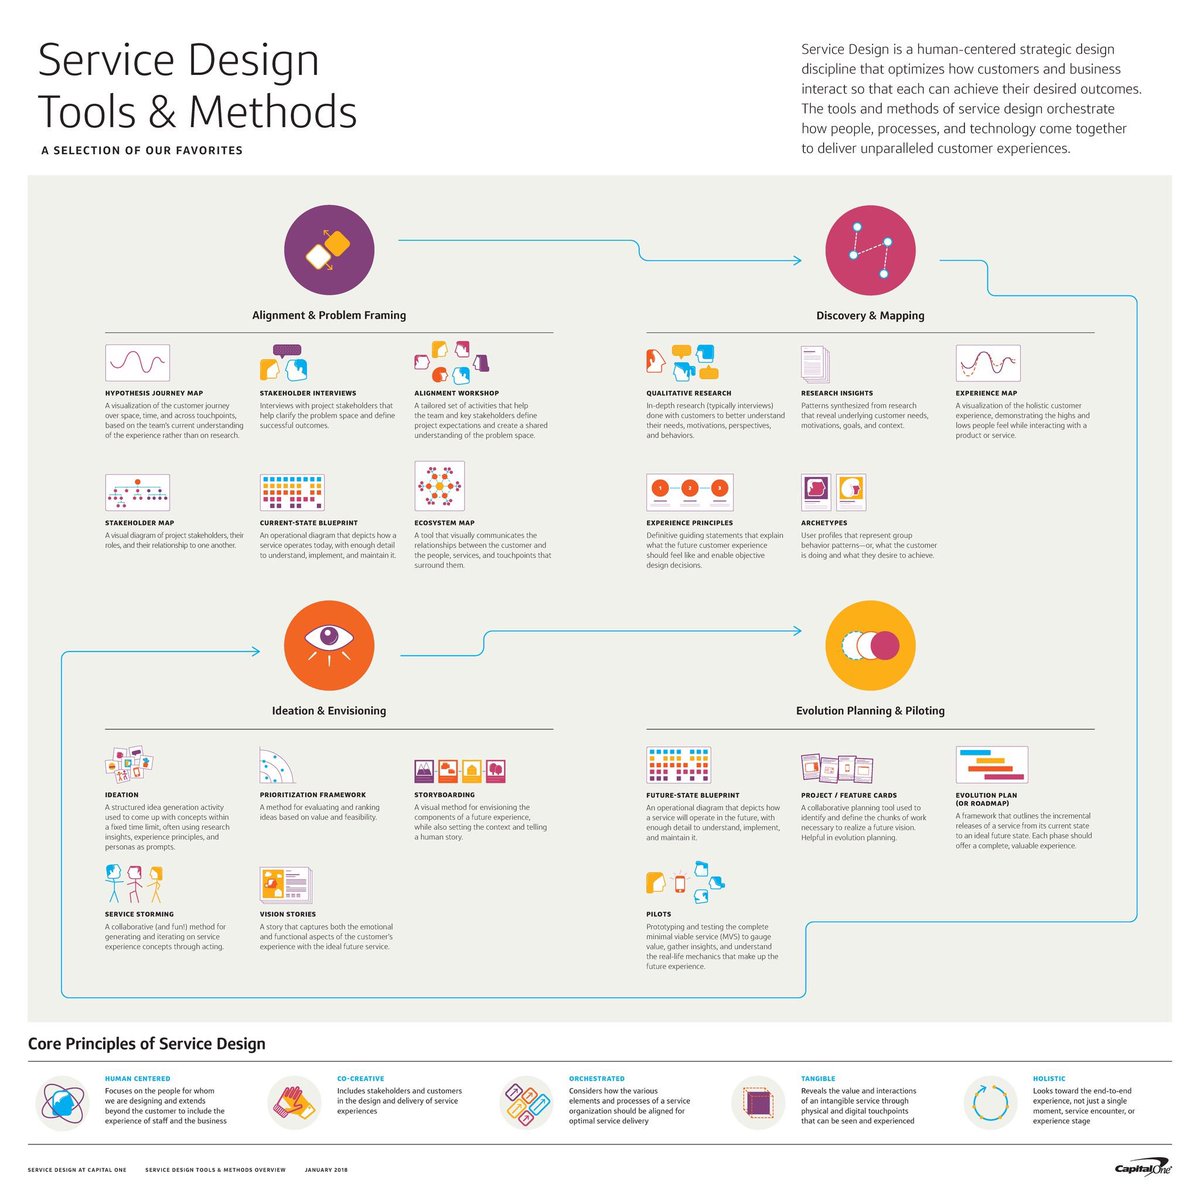 Service Design Tools and Methods 😀. Which are your favorite tools? 

👇🏻
bit.ly/2K7vTTJ
#servicedesign #designthinking #ux #uxdesign #designmethods #empathy #uxtools